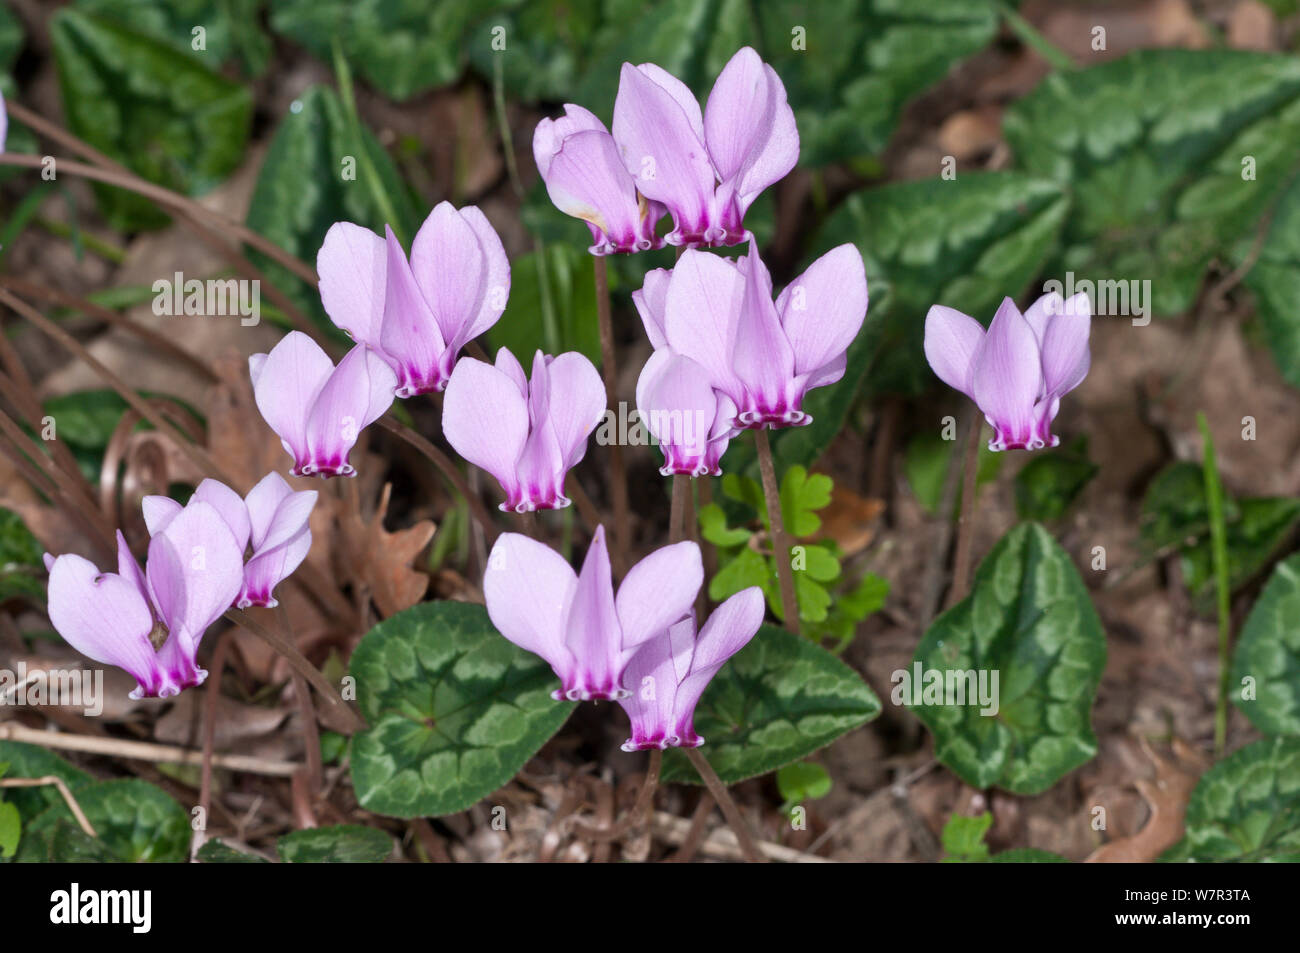 Sowbread (Cyclamen hederifolium) in flower,  an autumn flowering species, near the Etruscan tombs at Norchia, near VIterbo, Lazio, Italy, October Stock Photo